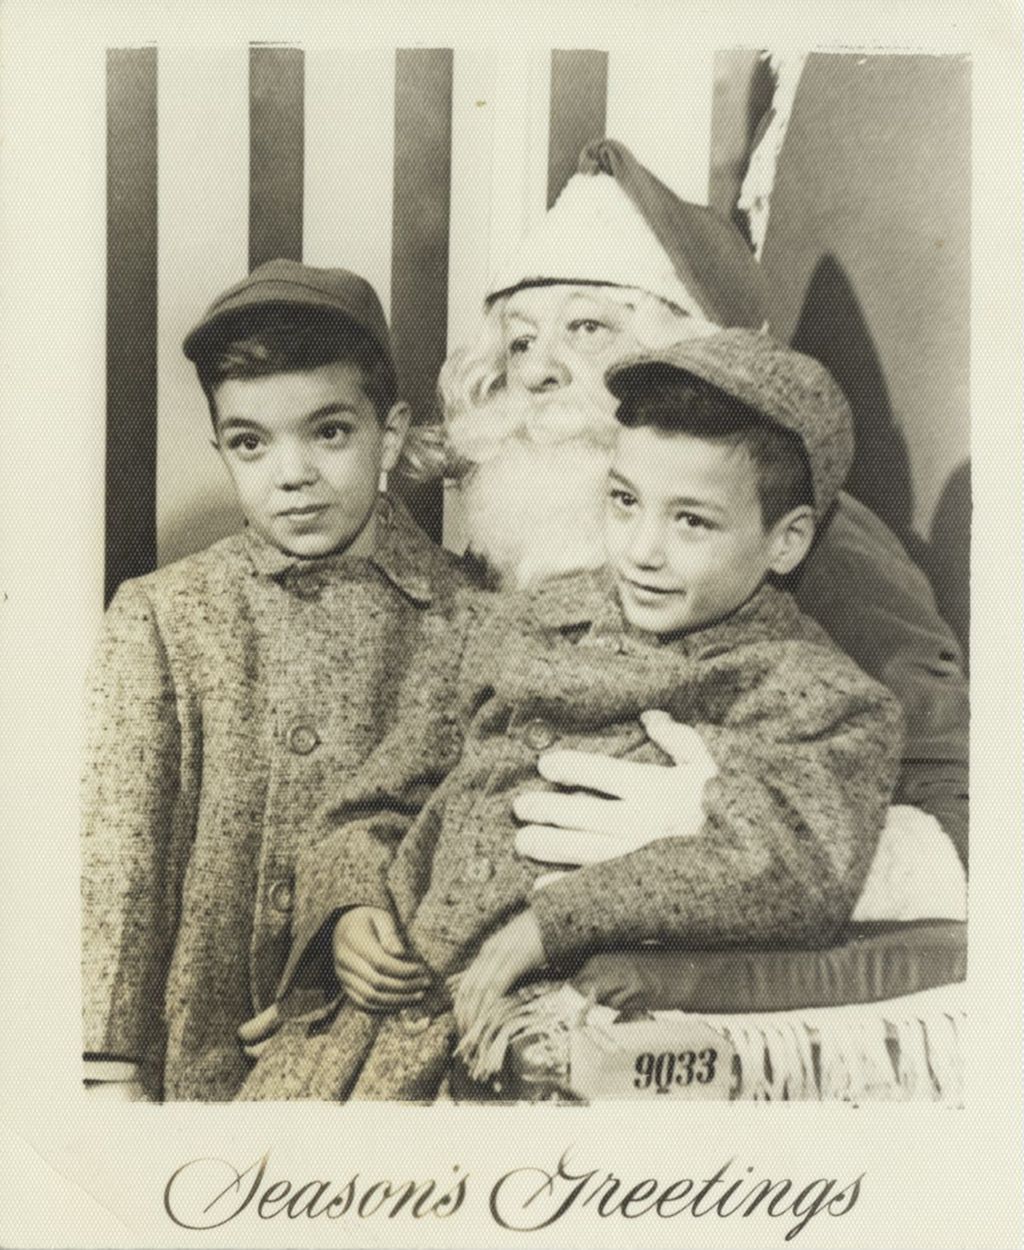 Miniature of John and William Daley with Santa